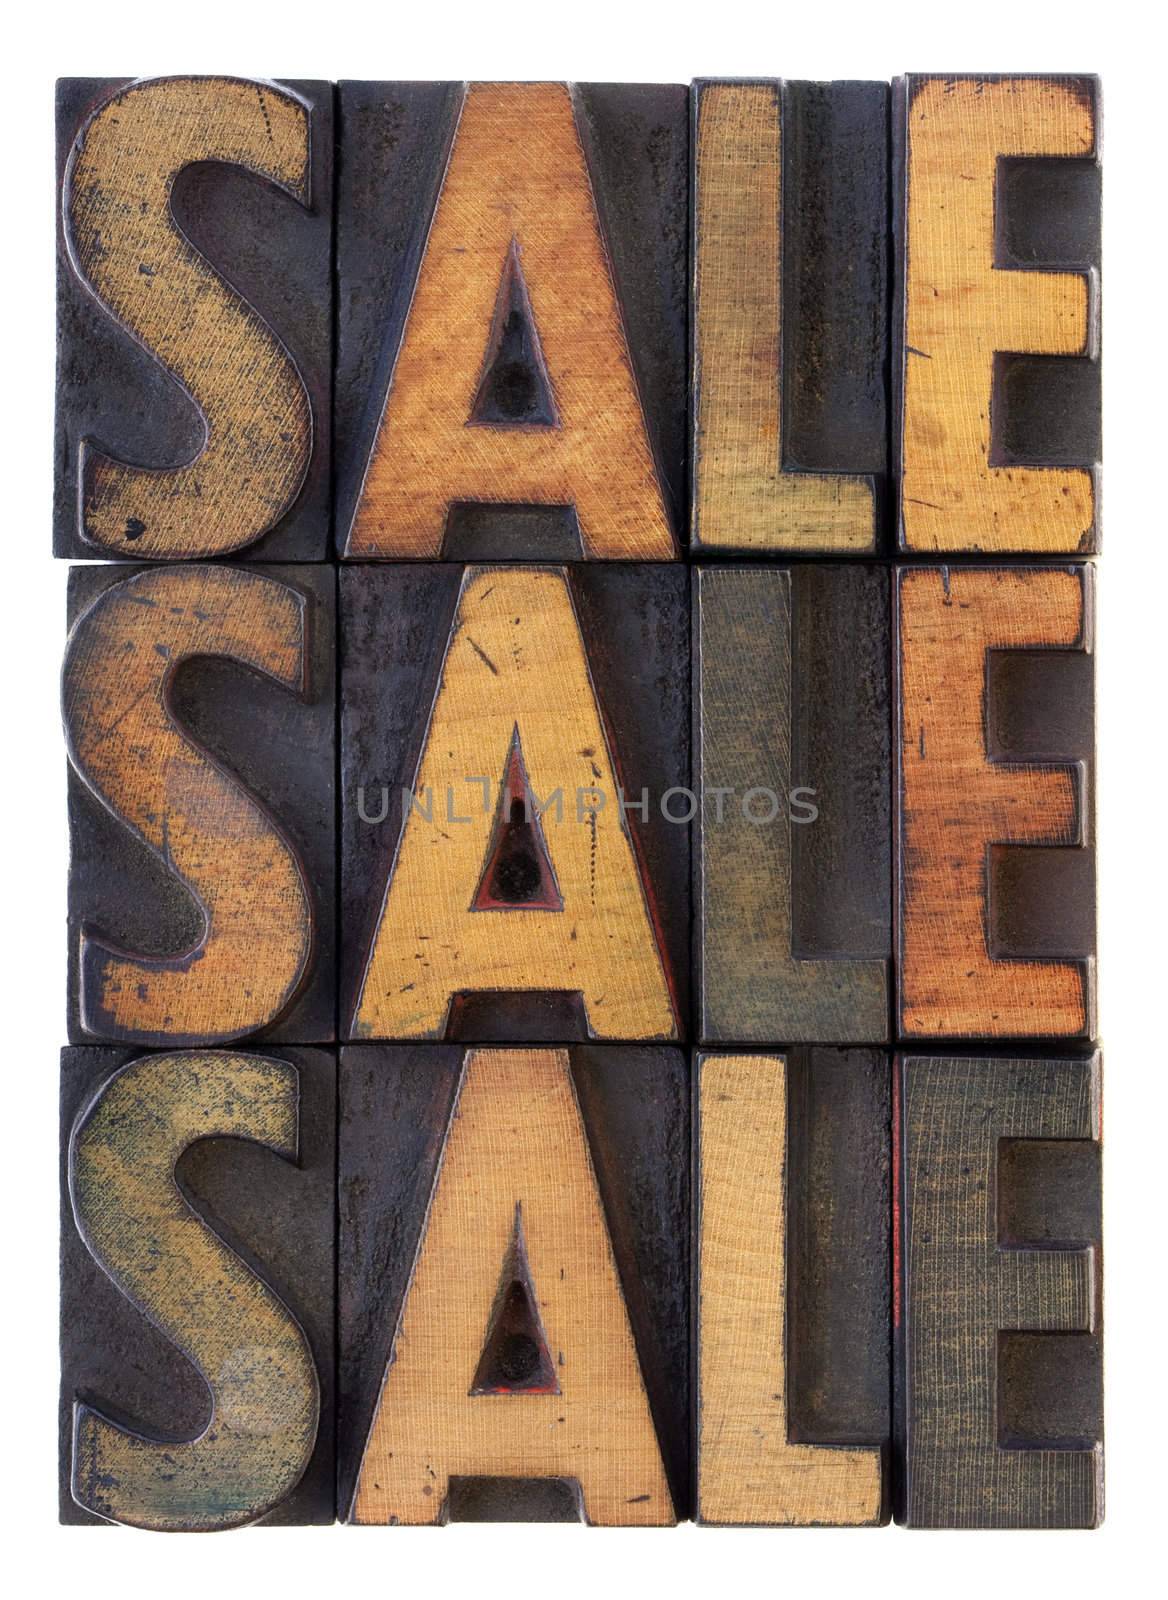 the word sale (three versions) in vintage wooden letterpress type, stained by ink, isolated on white